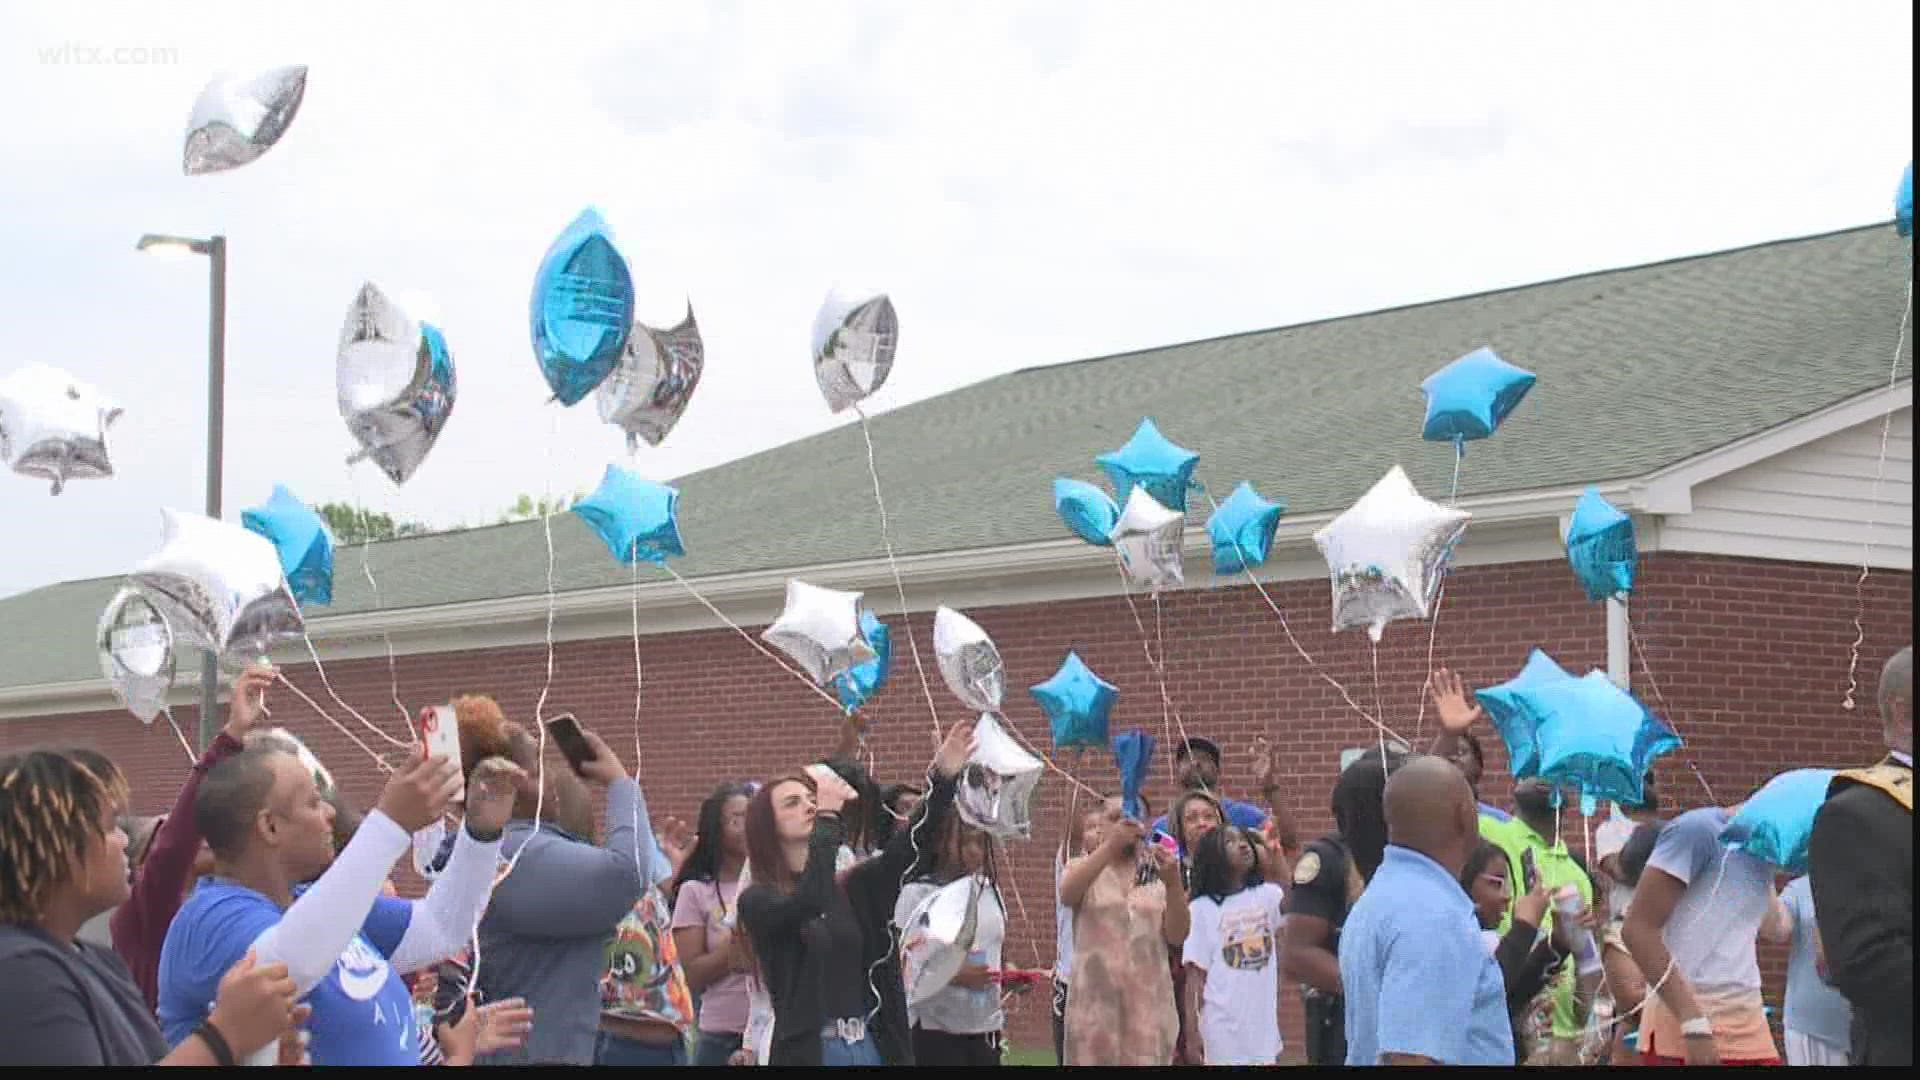 The Newberry community gathered Thursday to remember the 4 teens whose lives were lost to gun violence over the weekend.